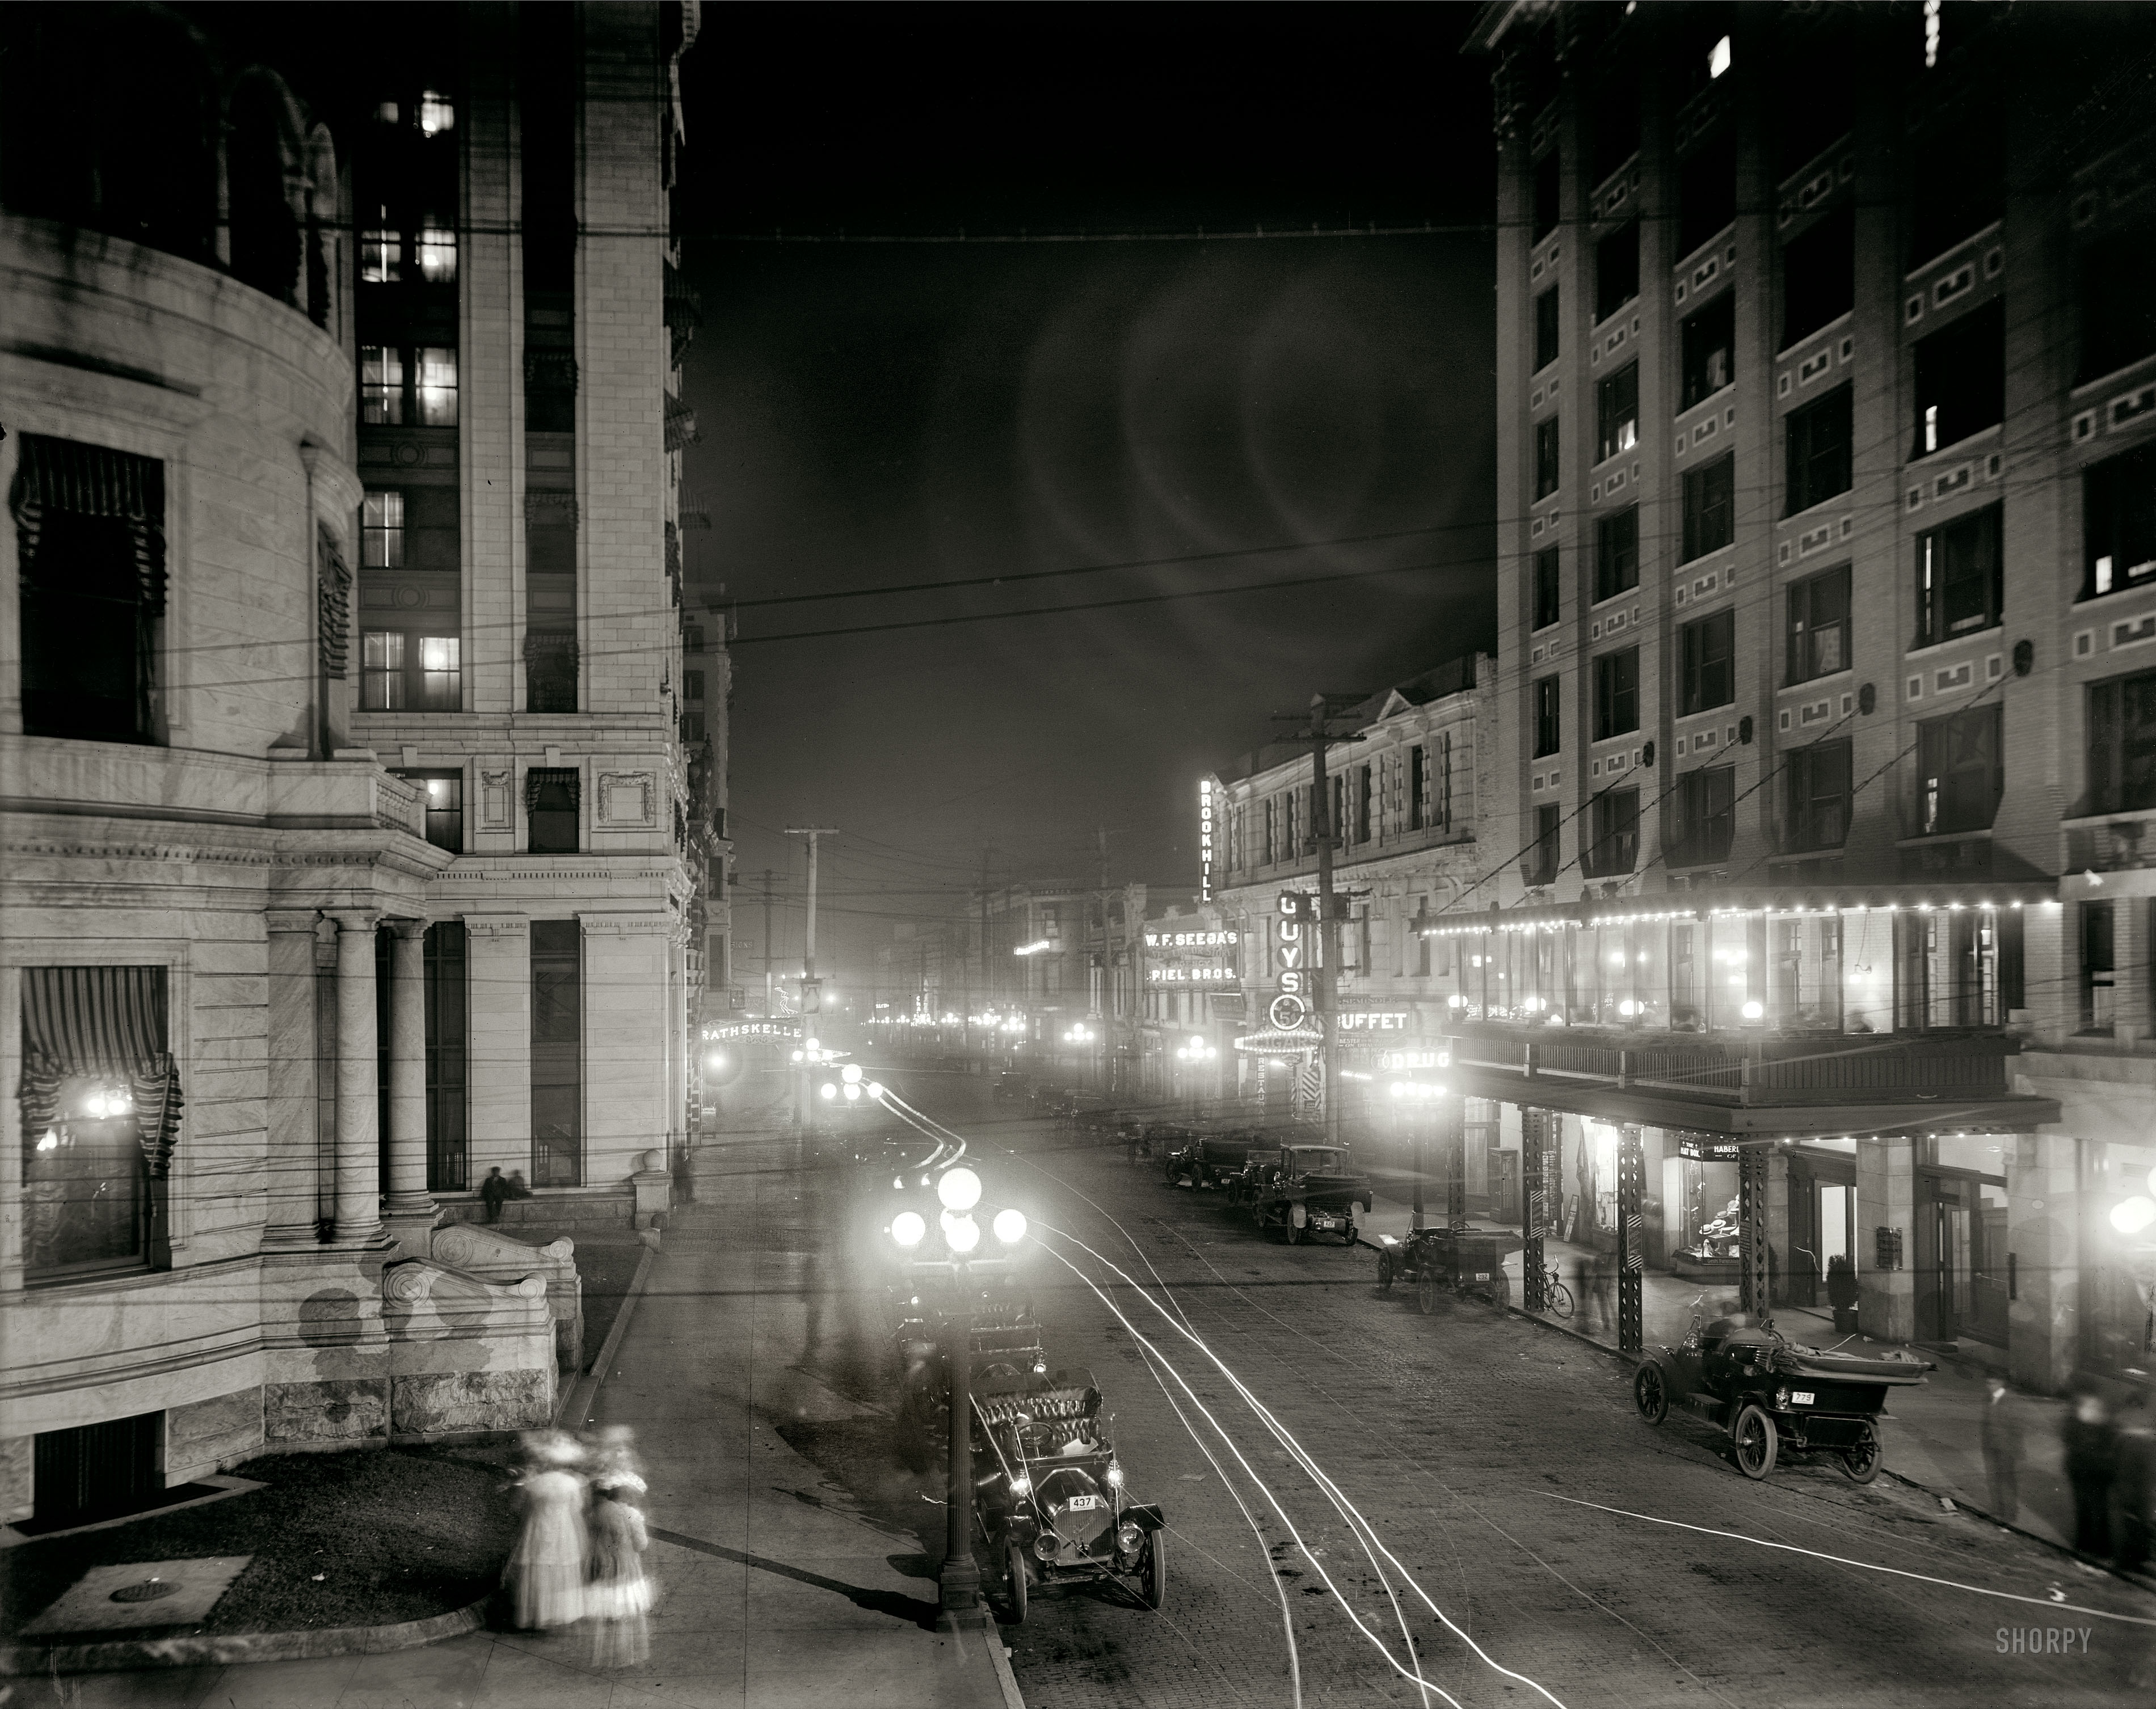 Jacksonville, Florida, circa 1910. "Forsyth Street at night." 8x10 inch dry plate glass negative, Detroit Publishing Company. View full size.